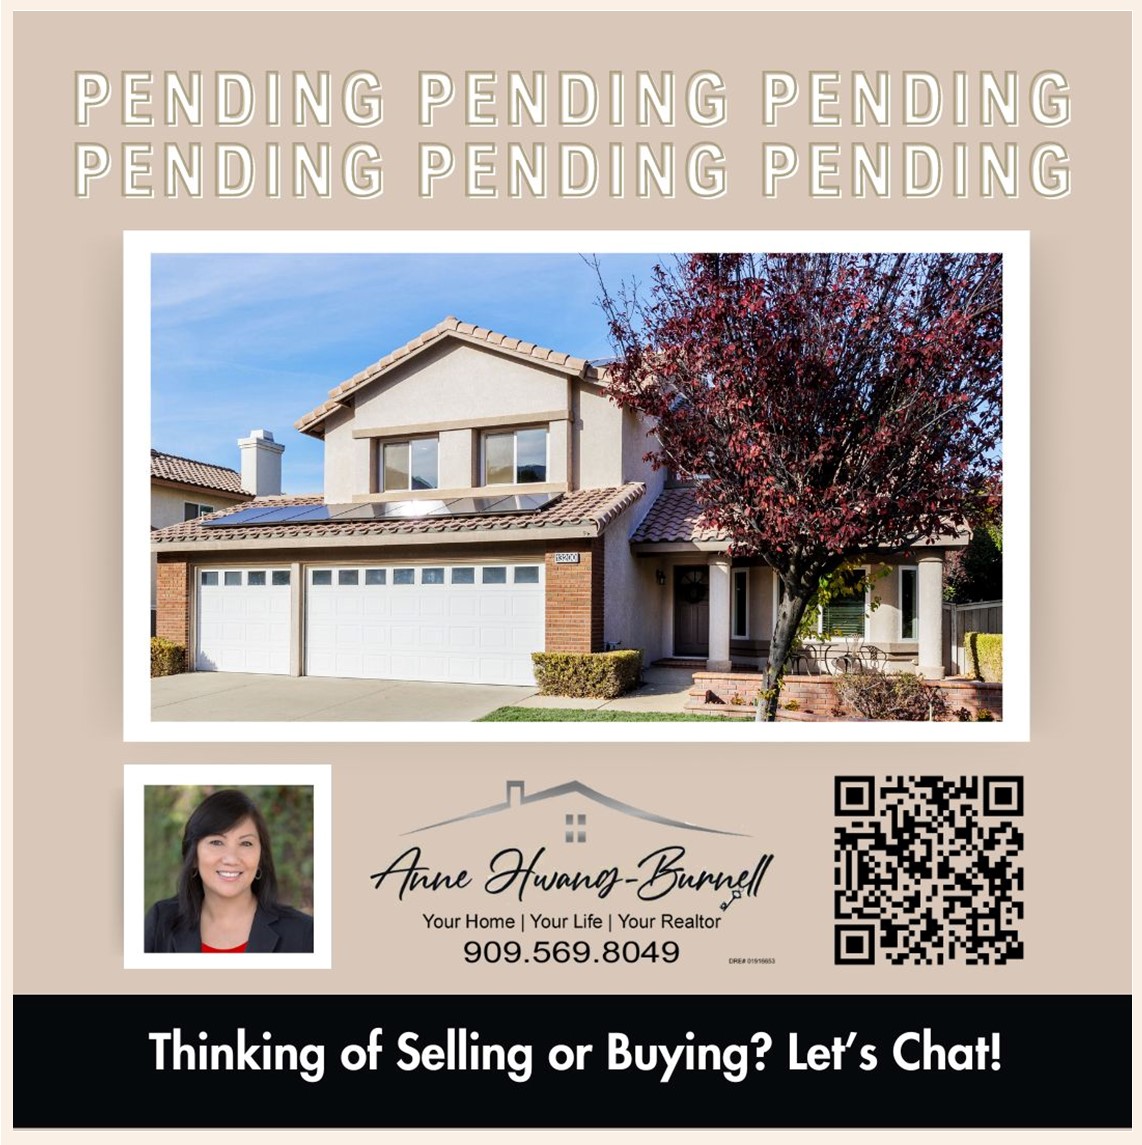 🎉 We're already in escrow! Thinking about selling or buying? 🏡 Let's talk! Reach out and let's explore your options together. 📞 

#annehwangburnellrealtor #listingtosell #listingagent
#RealEstate #Escrow #BuyOrSell